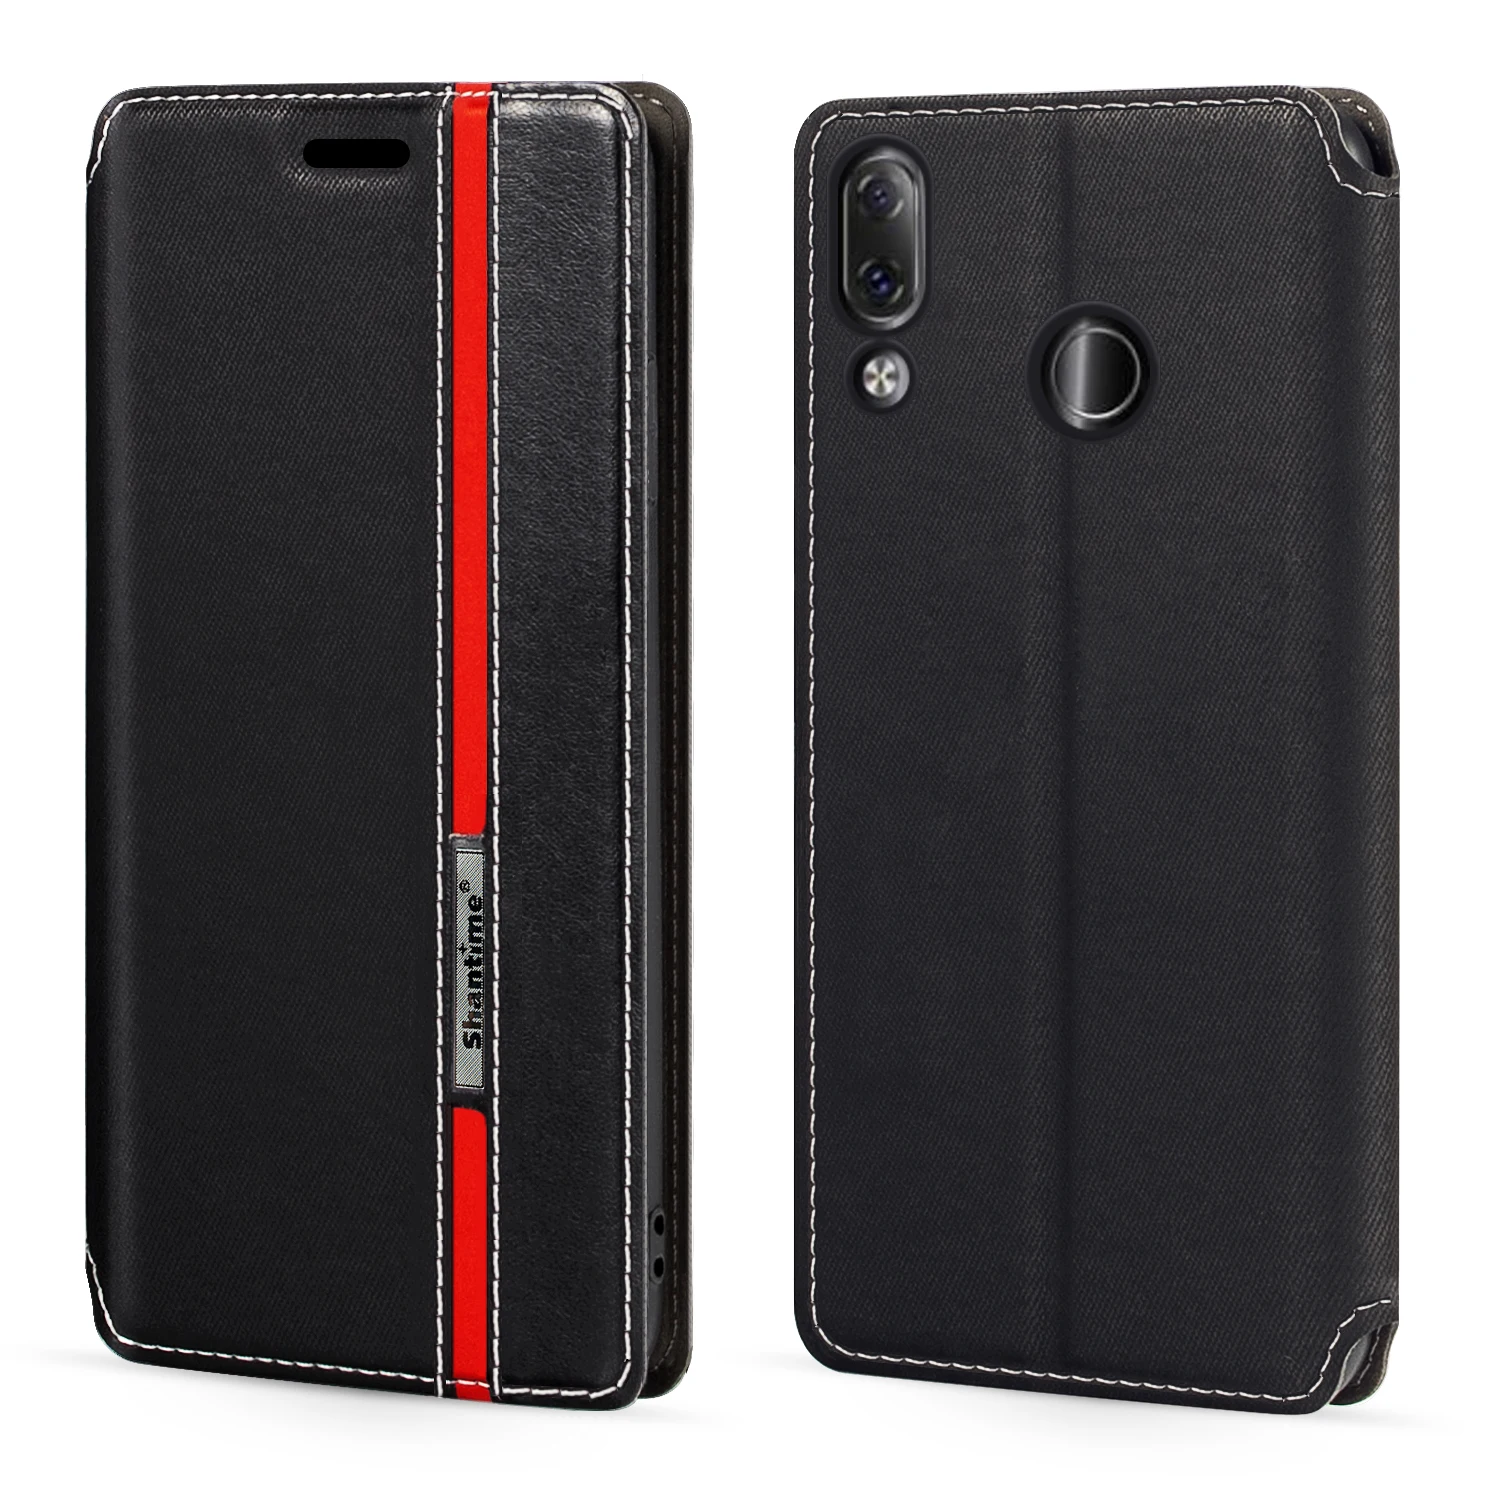 

For Lenovo Z5 Case Fashion Multicolor Magnetic Closure Leather Flip Case Cover with Card Holder 6.2 inches